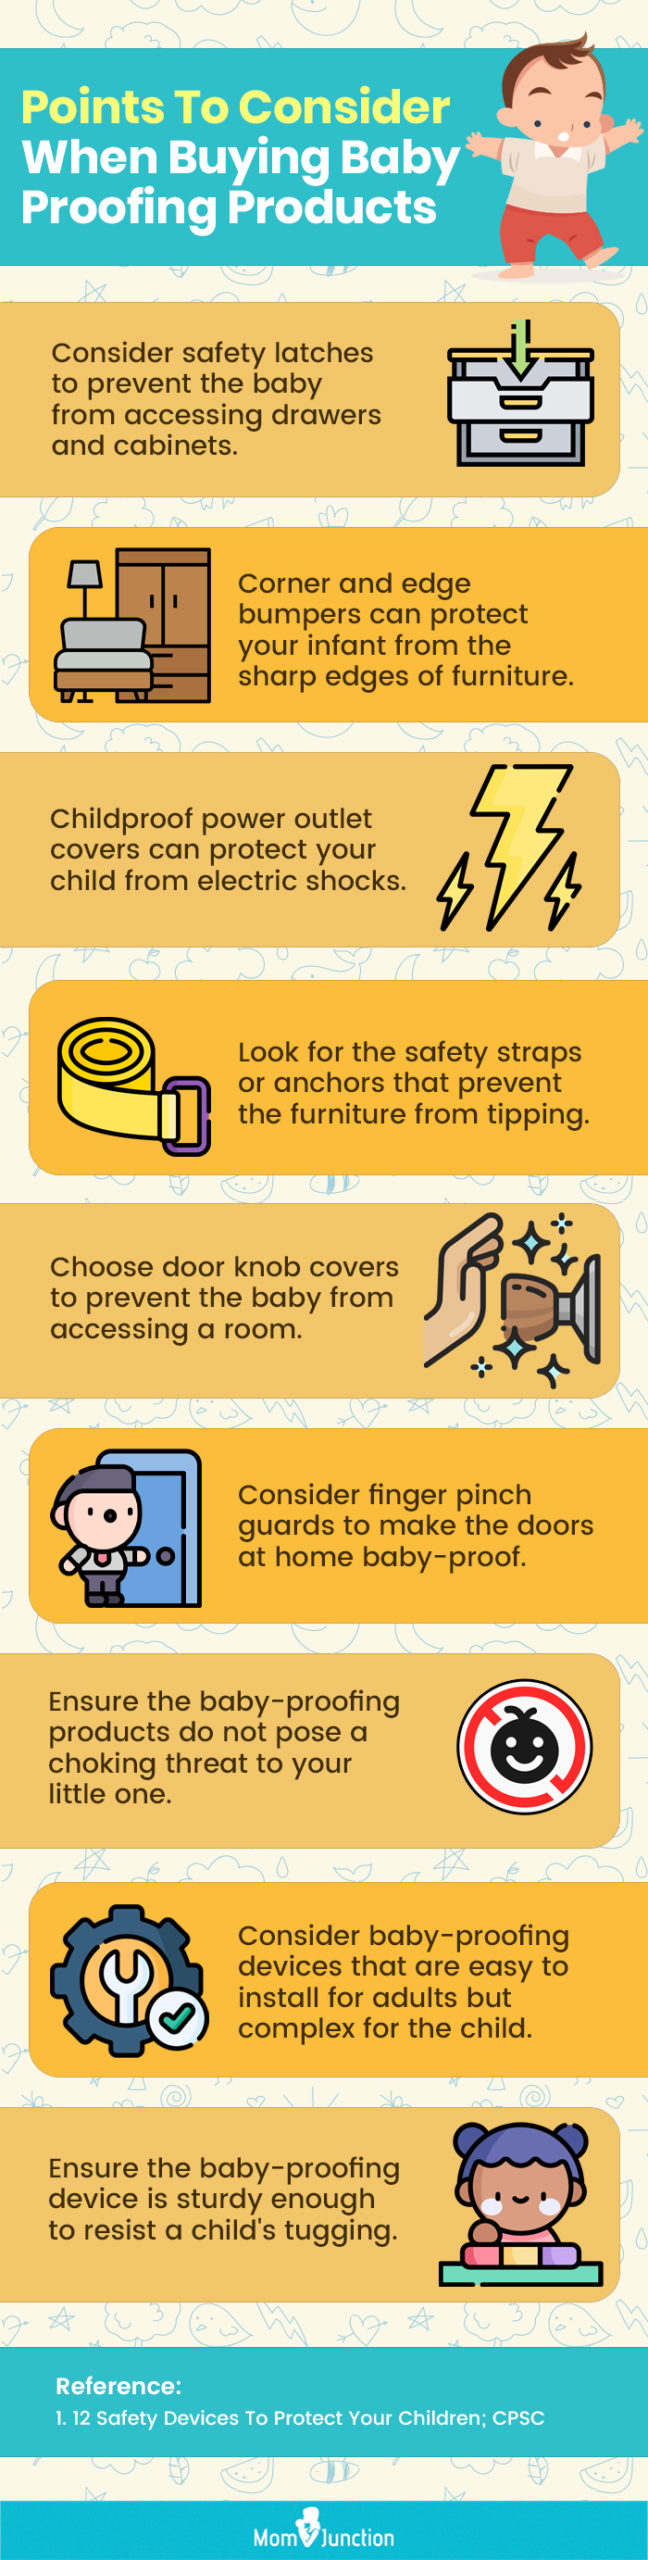 9 Best Baby Proofing Tips for Your Home » The Money Pit